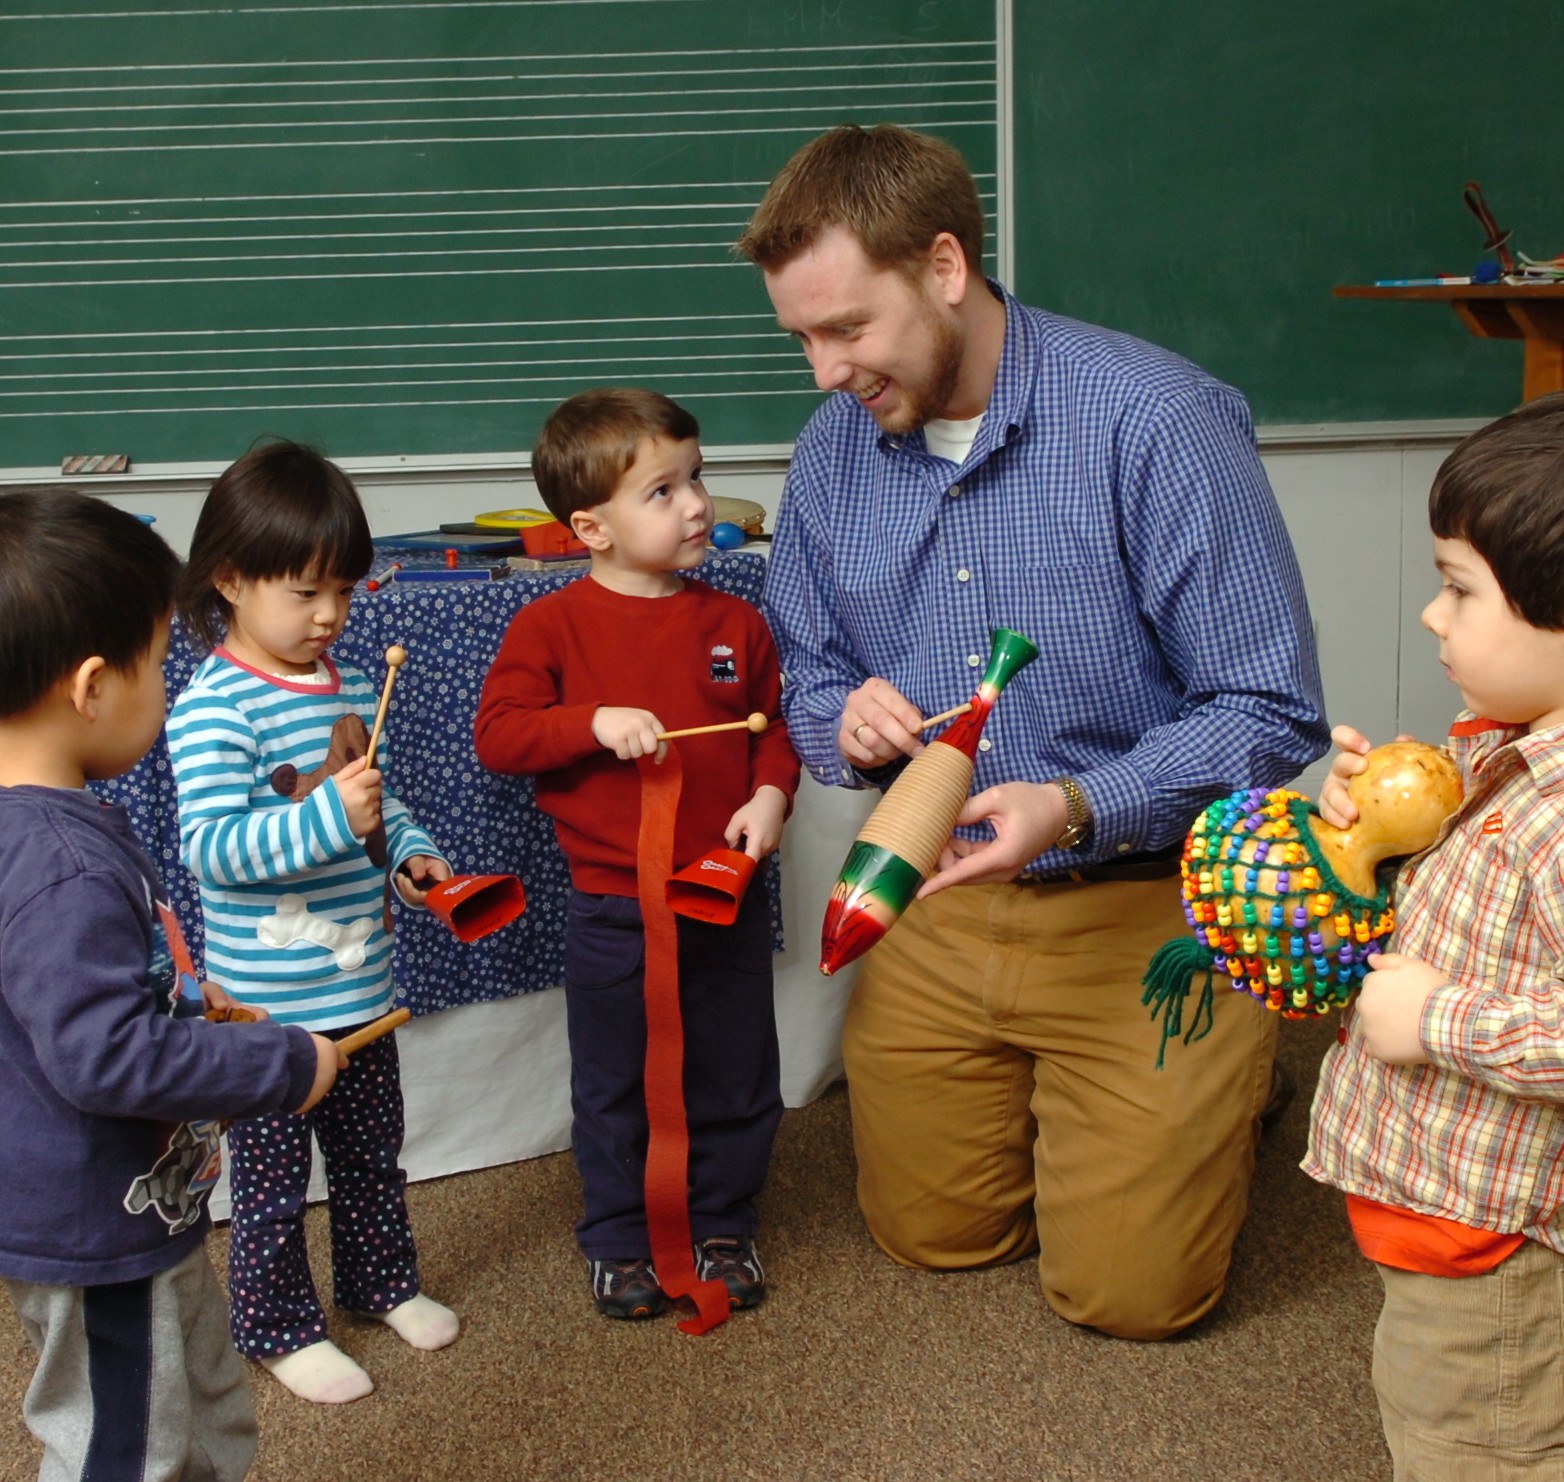 Conservatory early childhood teacher with children and percussion instruments